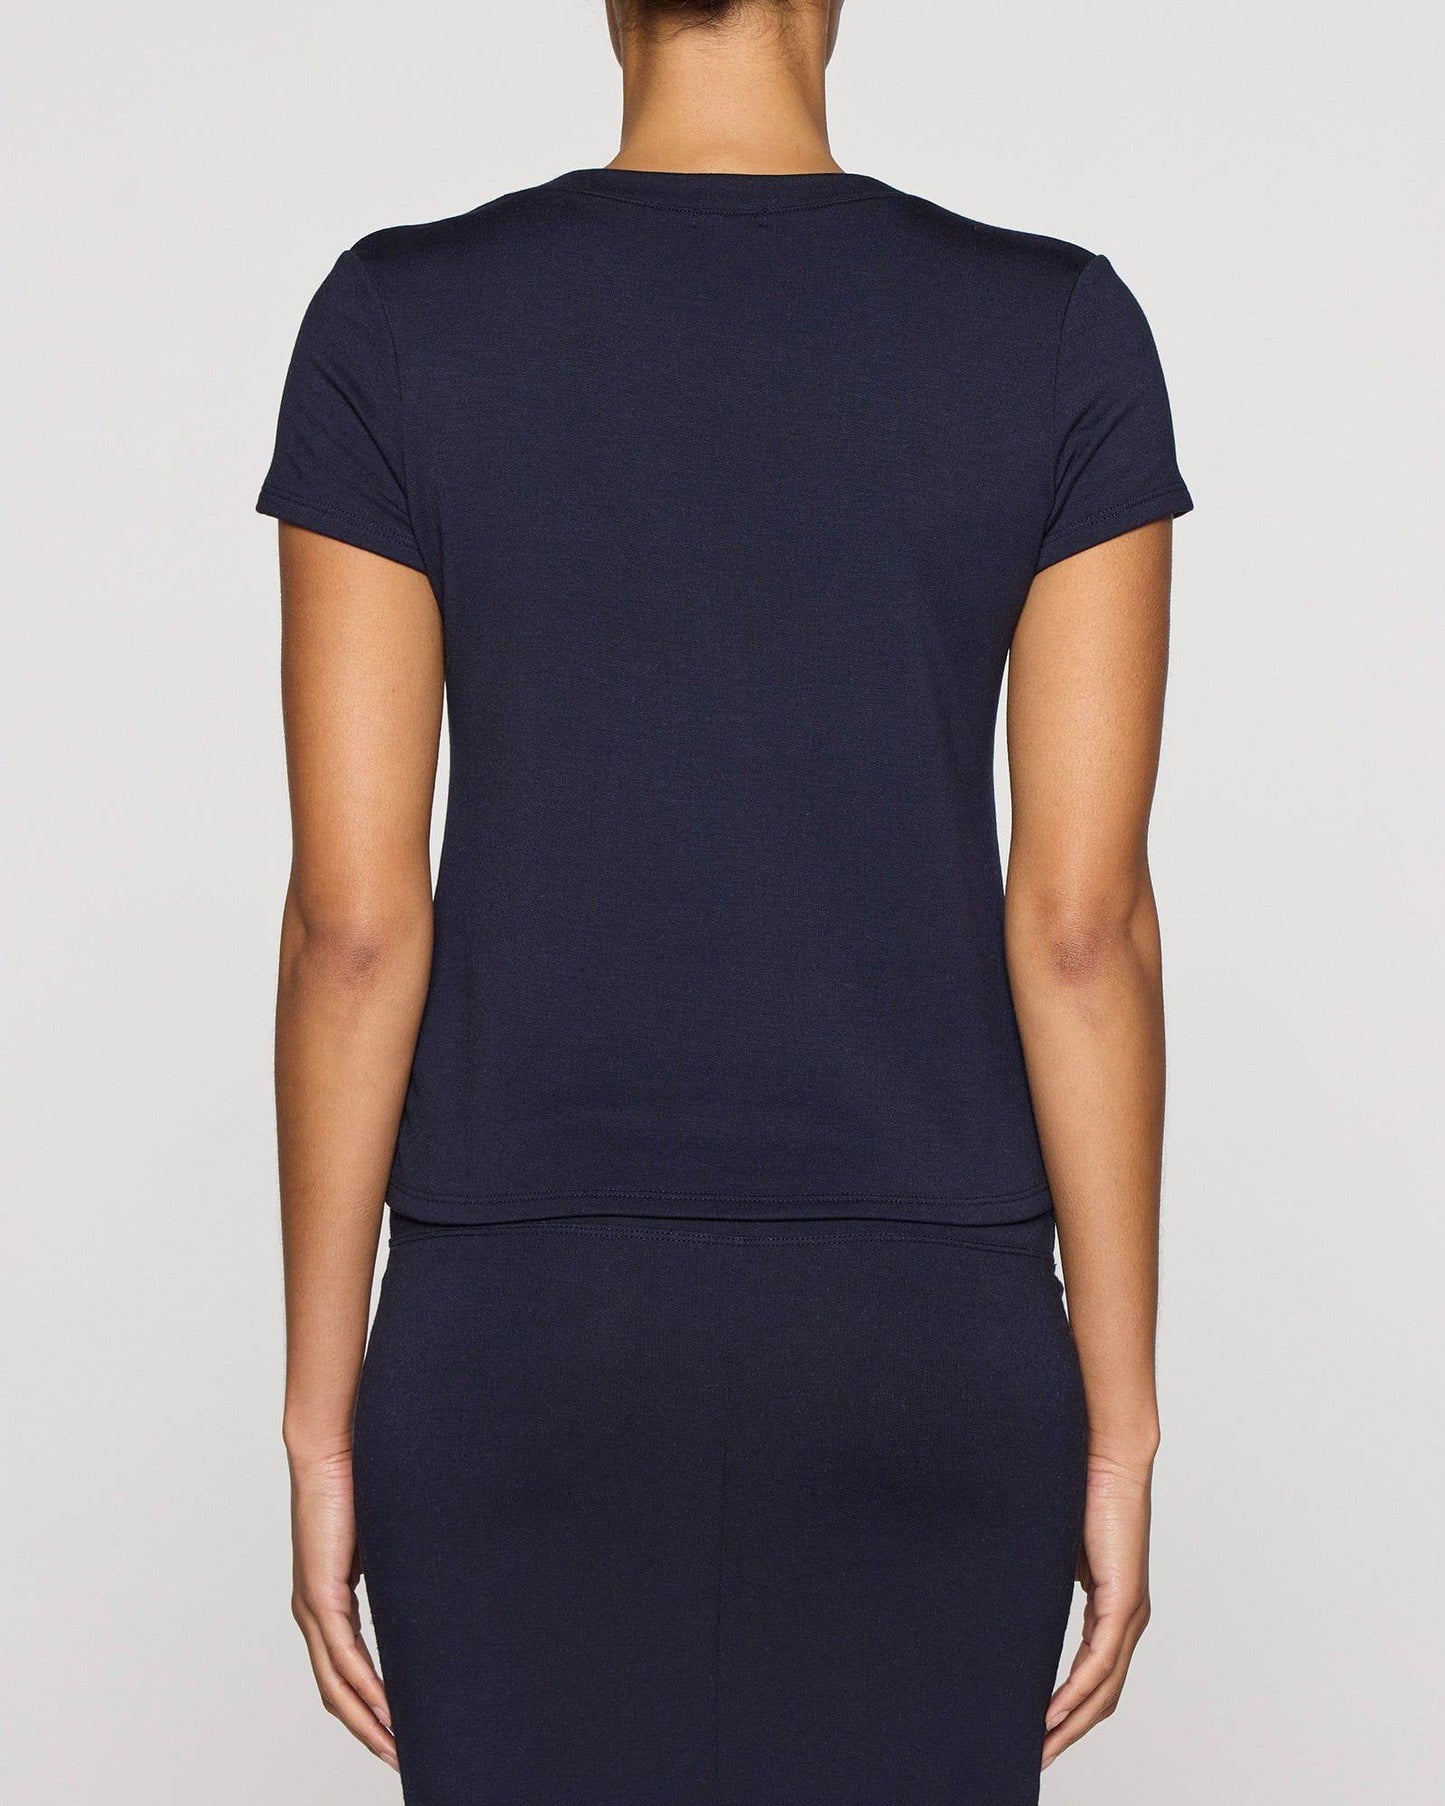 Navy | Back View